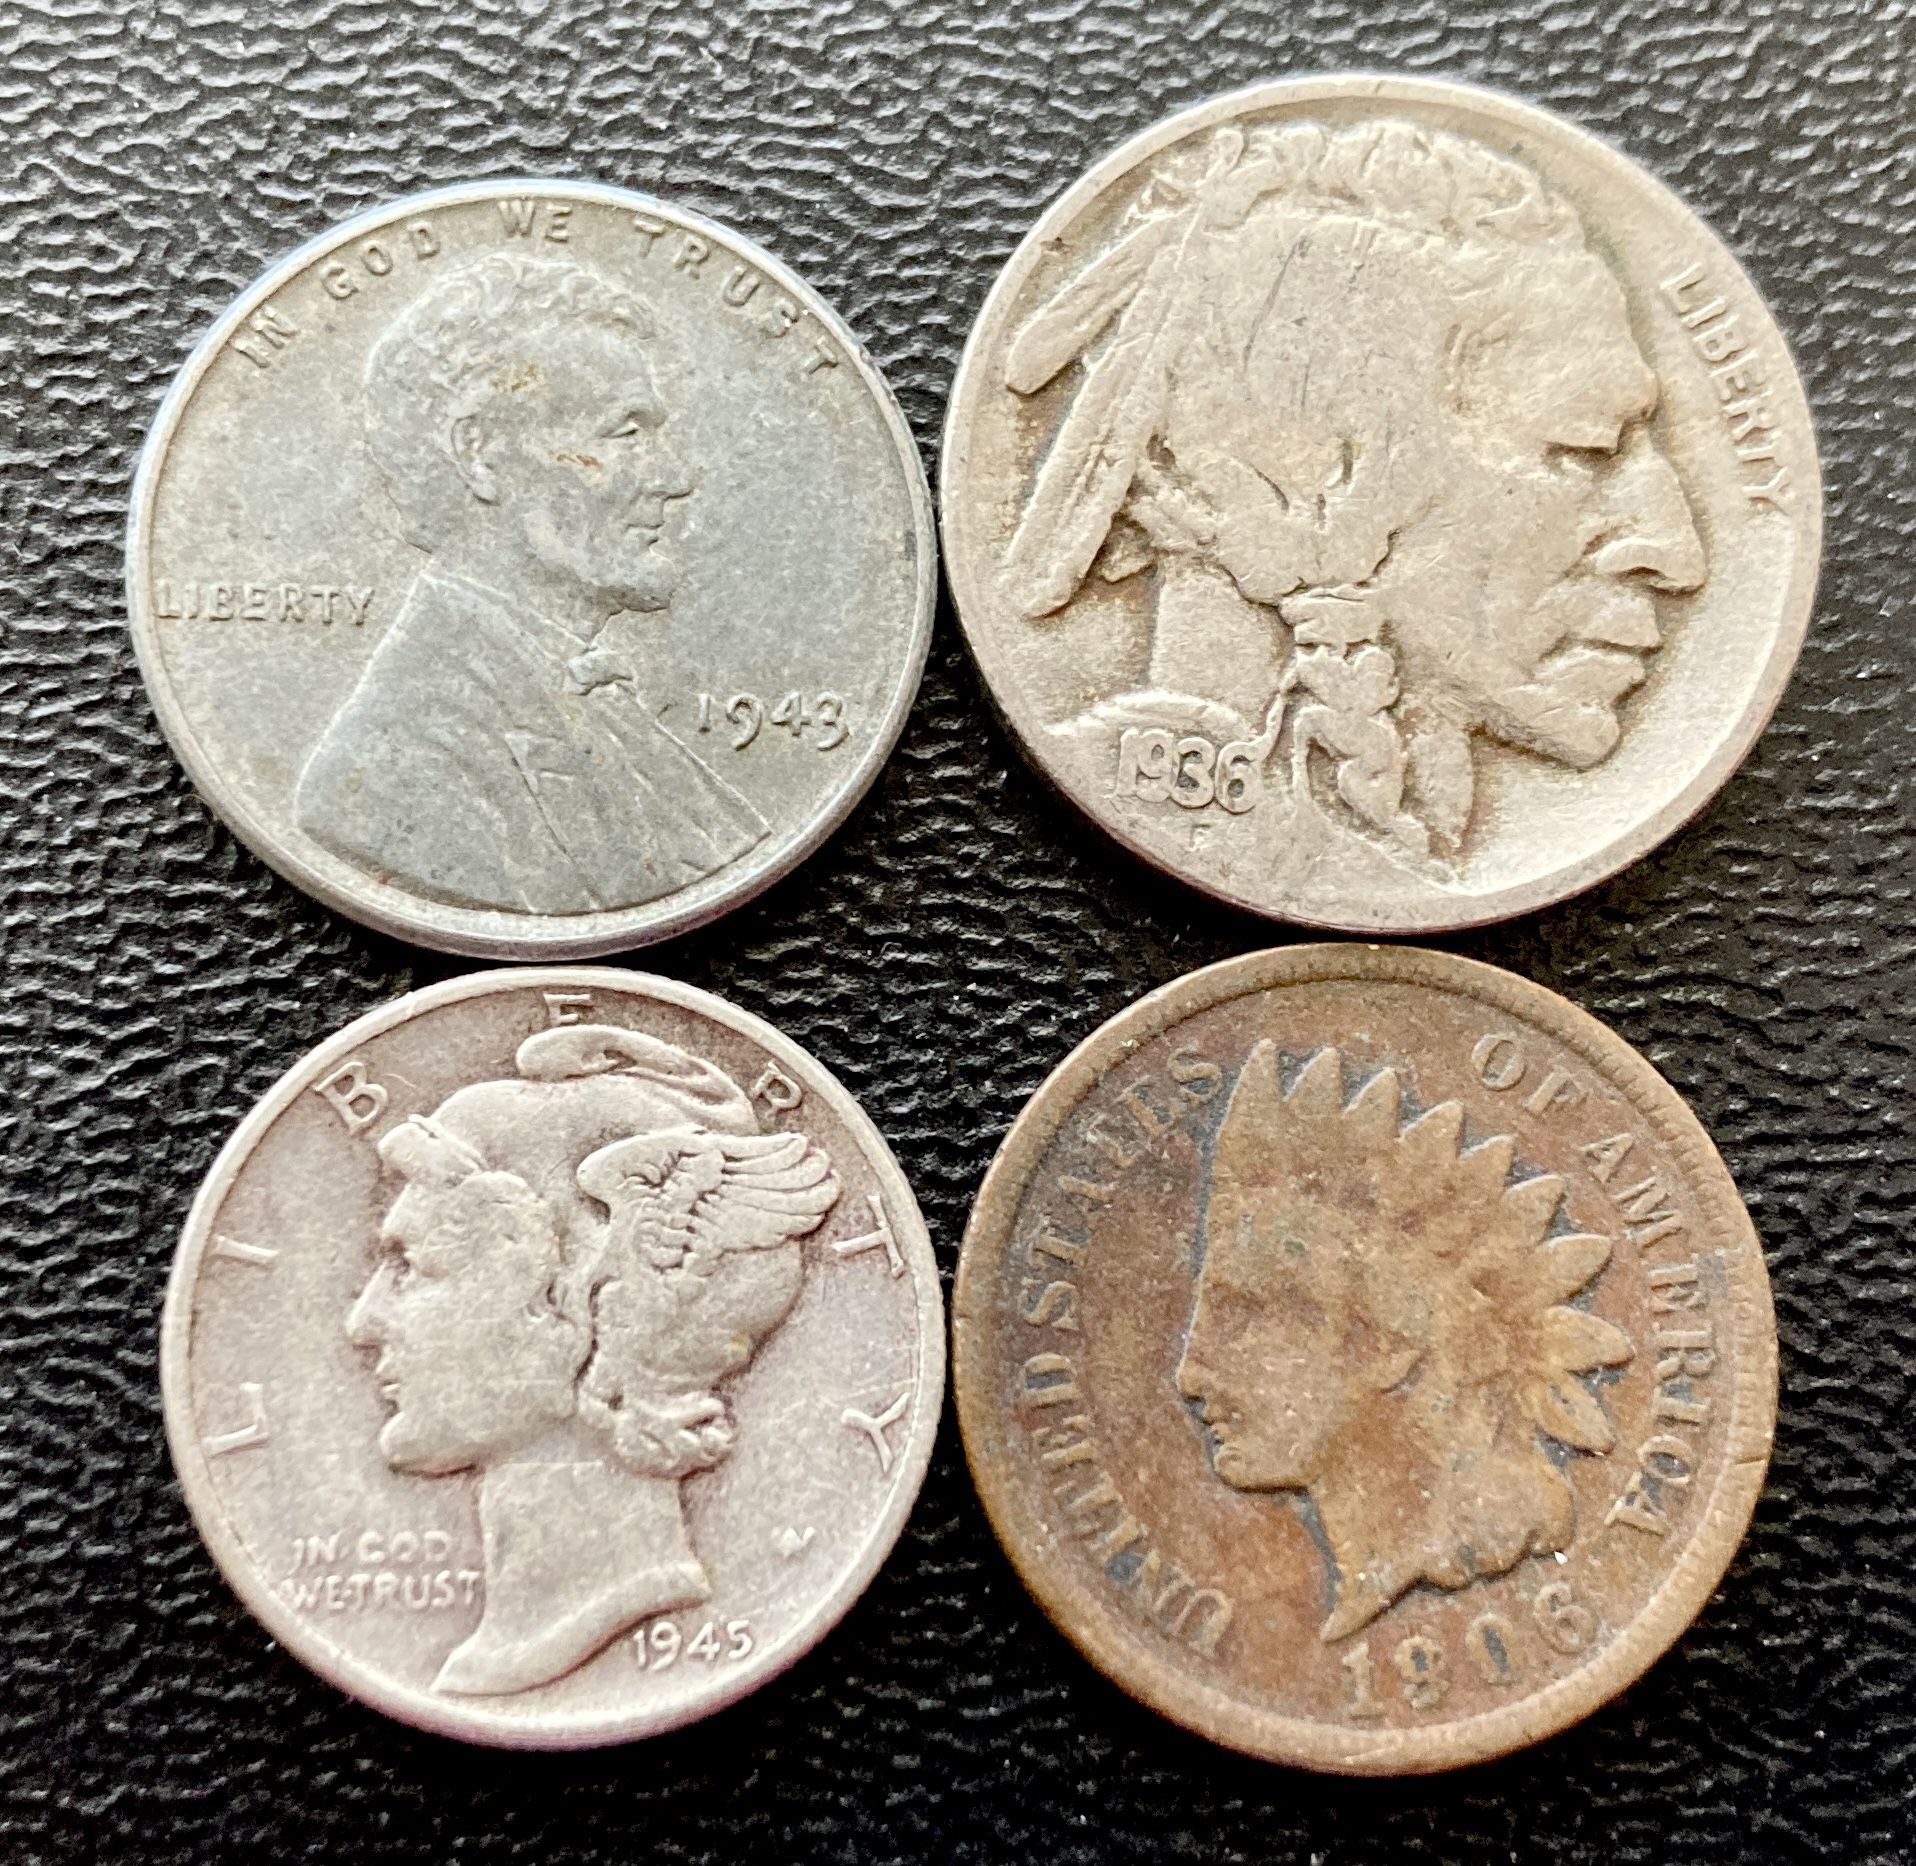 Indian Head Penny Buffalo Nickel 1943 Steel Cent Mercury Dime Four (4) Coin Set Collection Coins